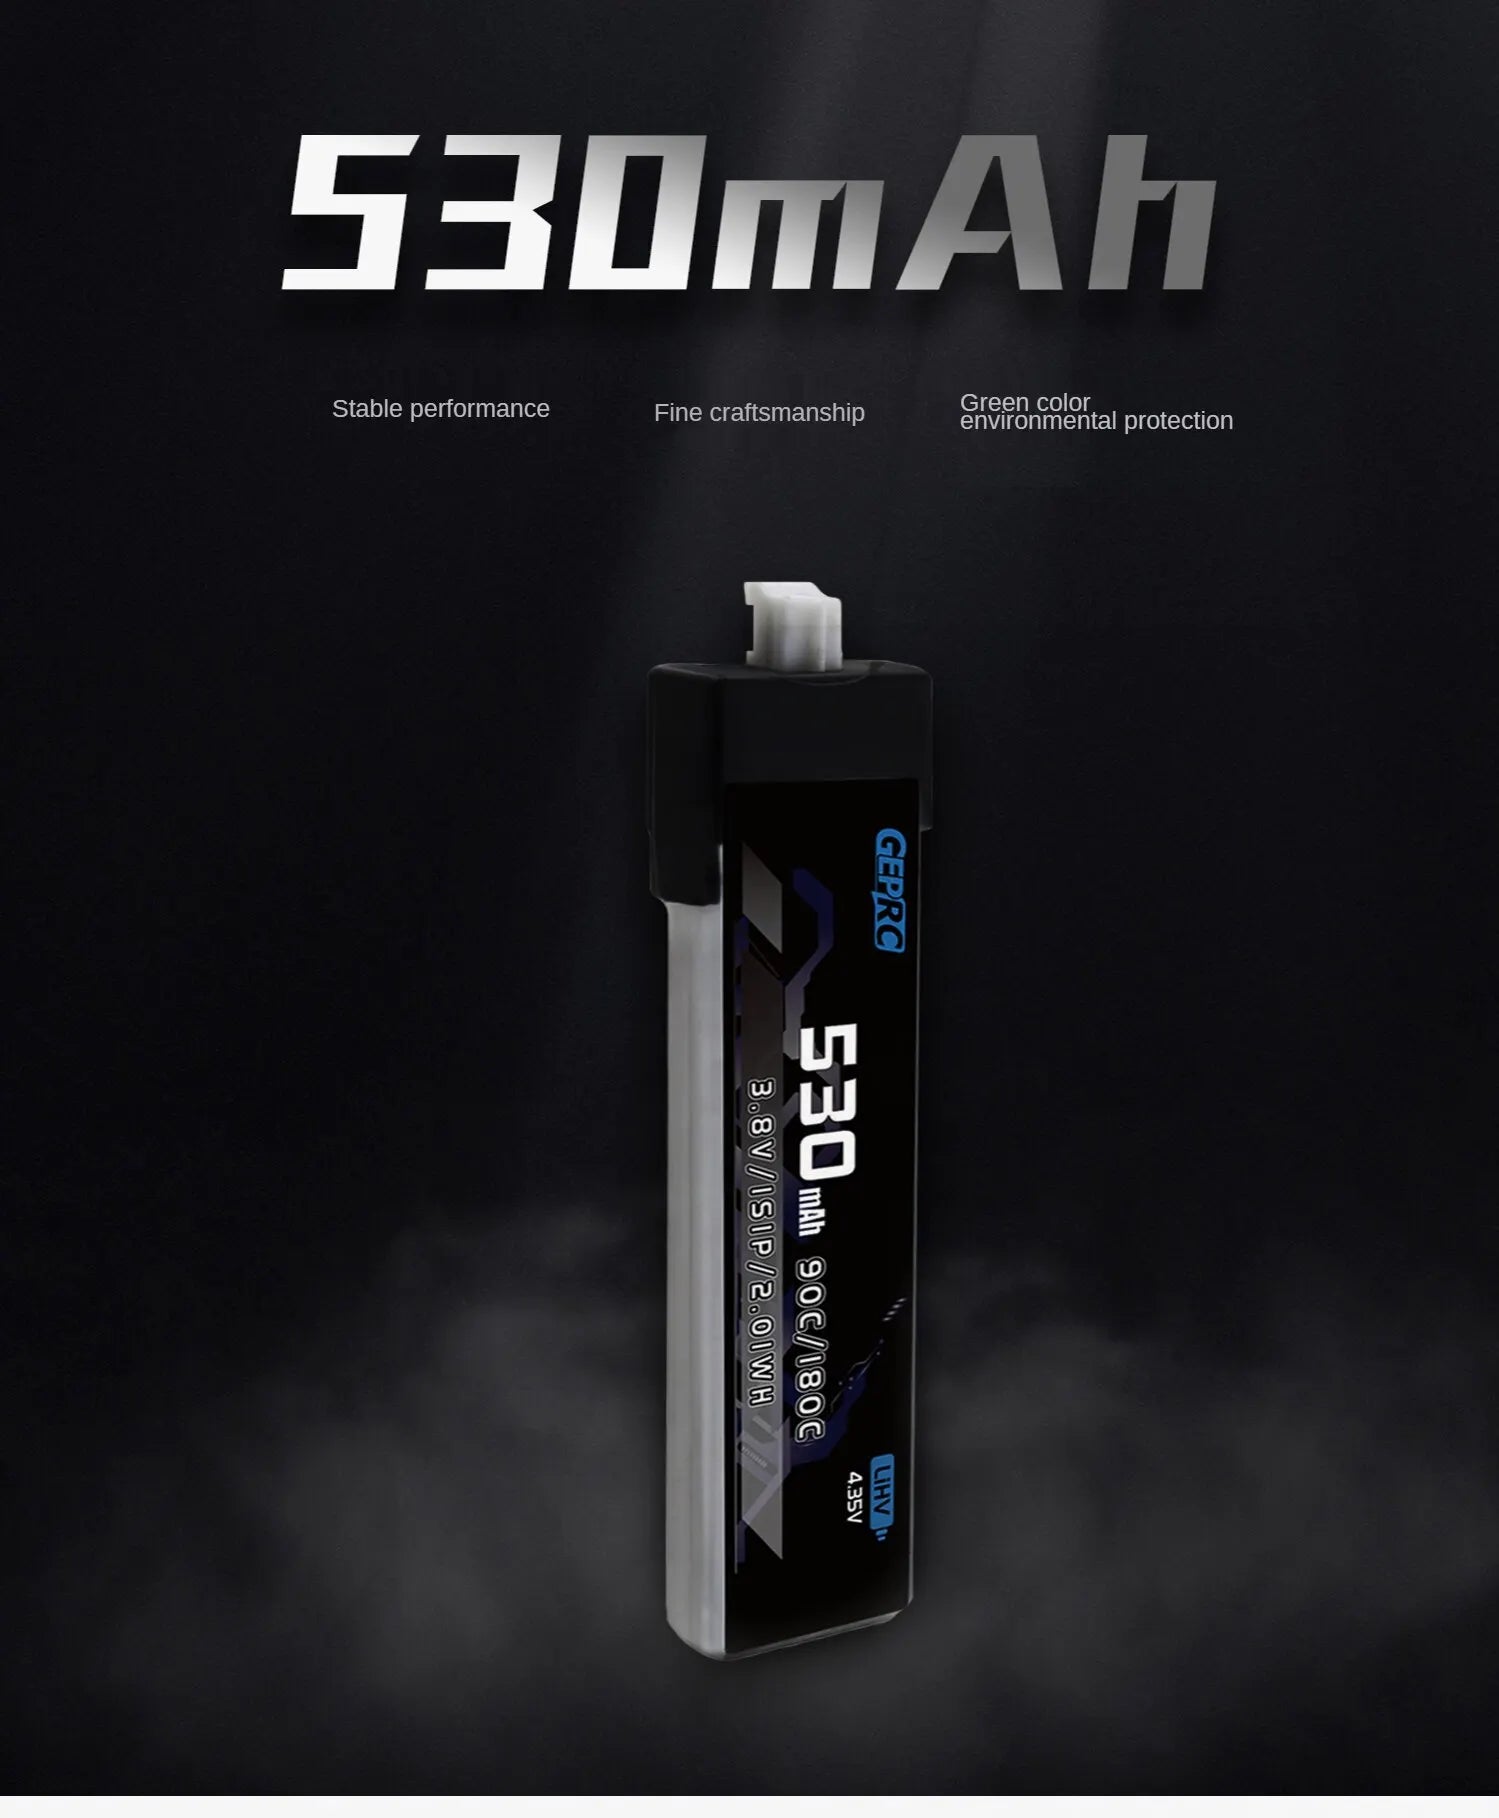 530MAh Stable performance Fine craftsmanship Green color environmental protection 8 8 5 1 